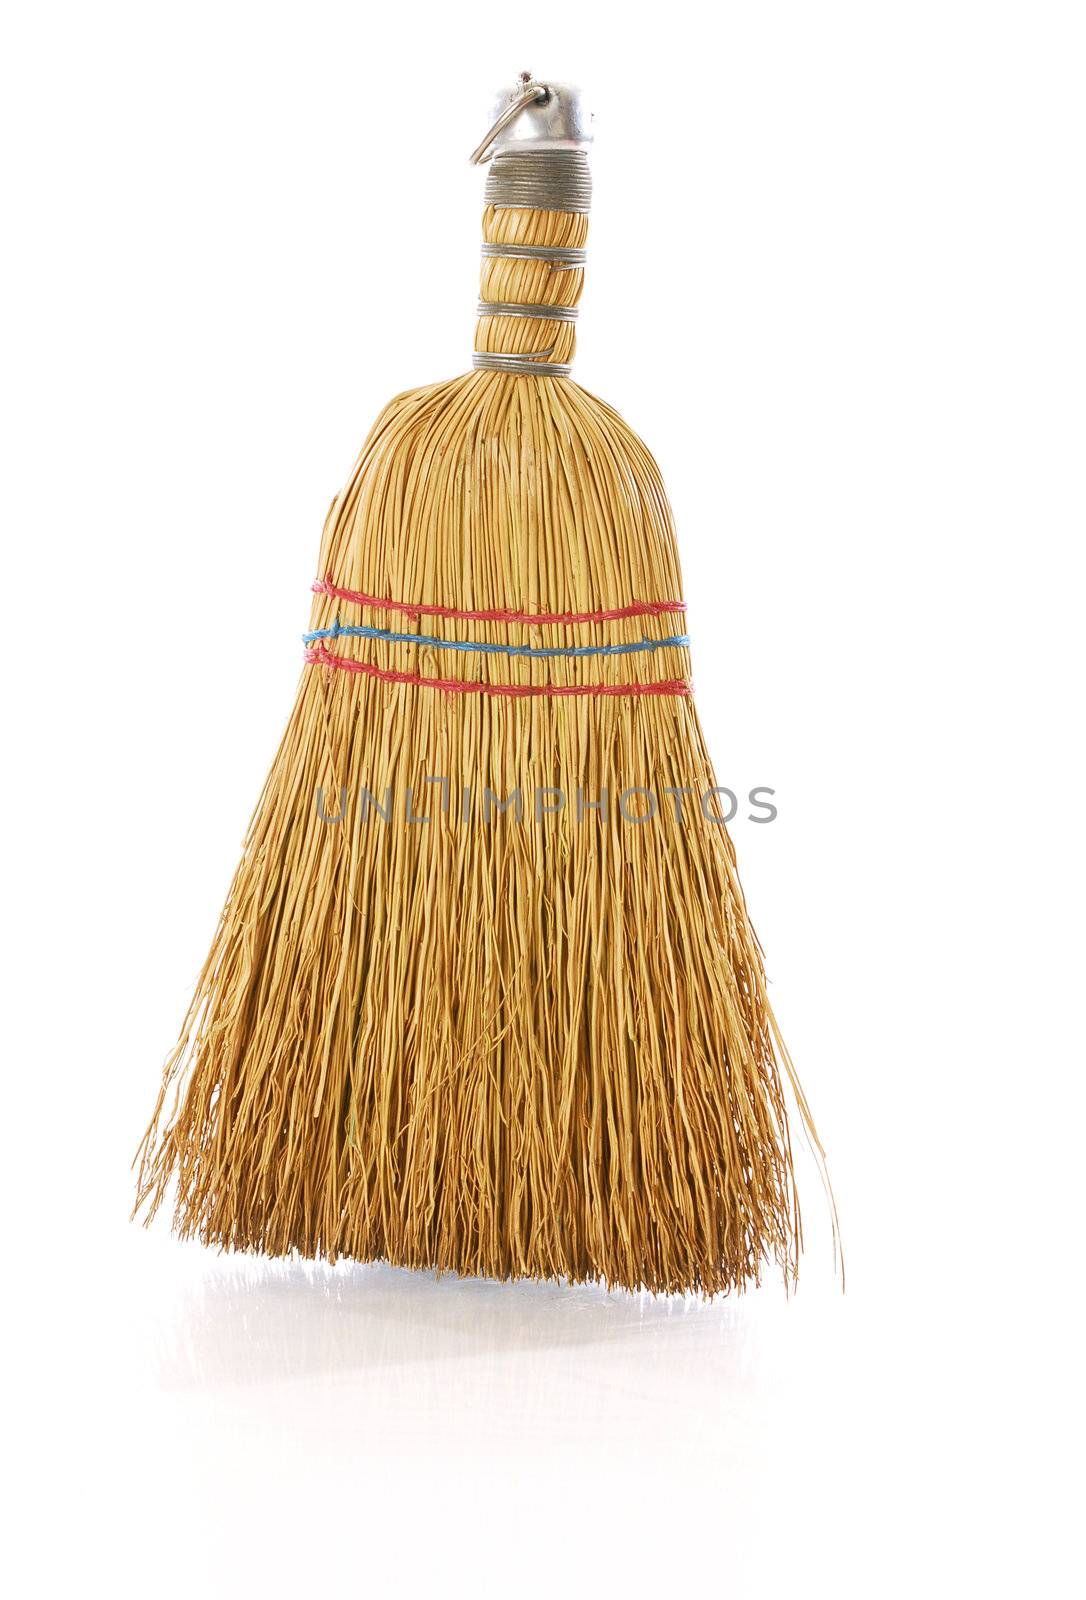 whisk broom with reflection on white background